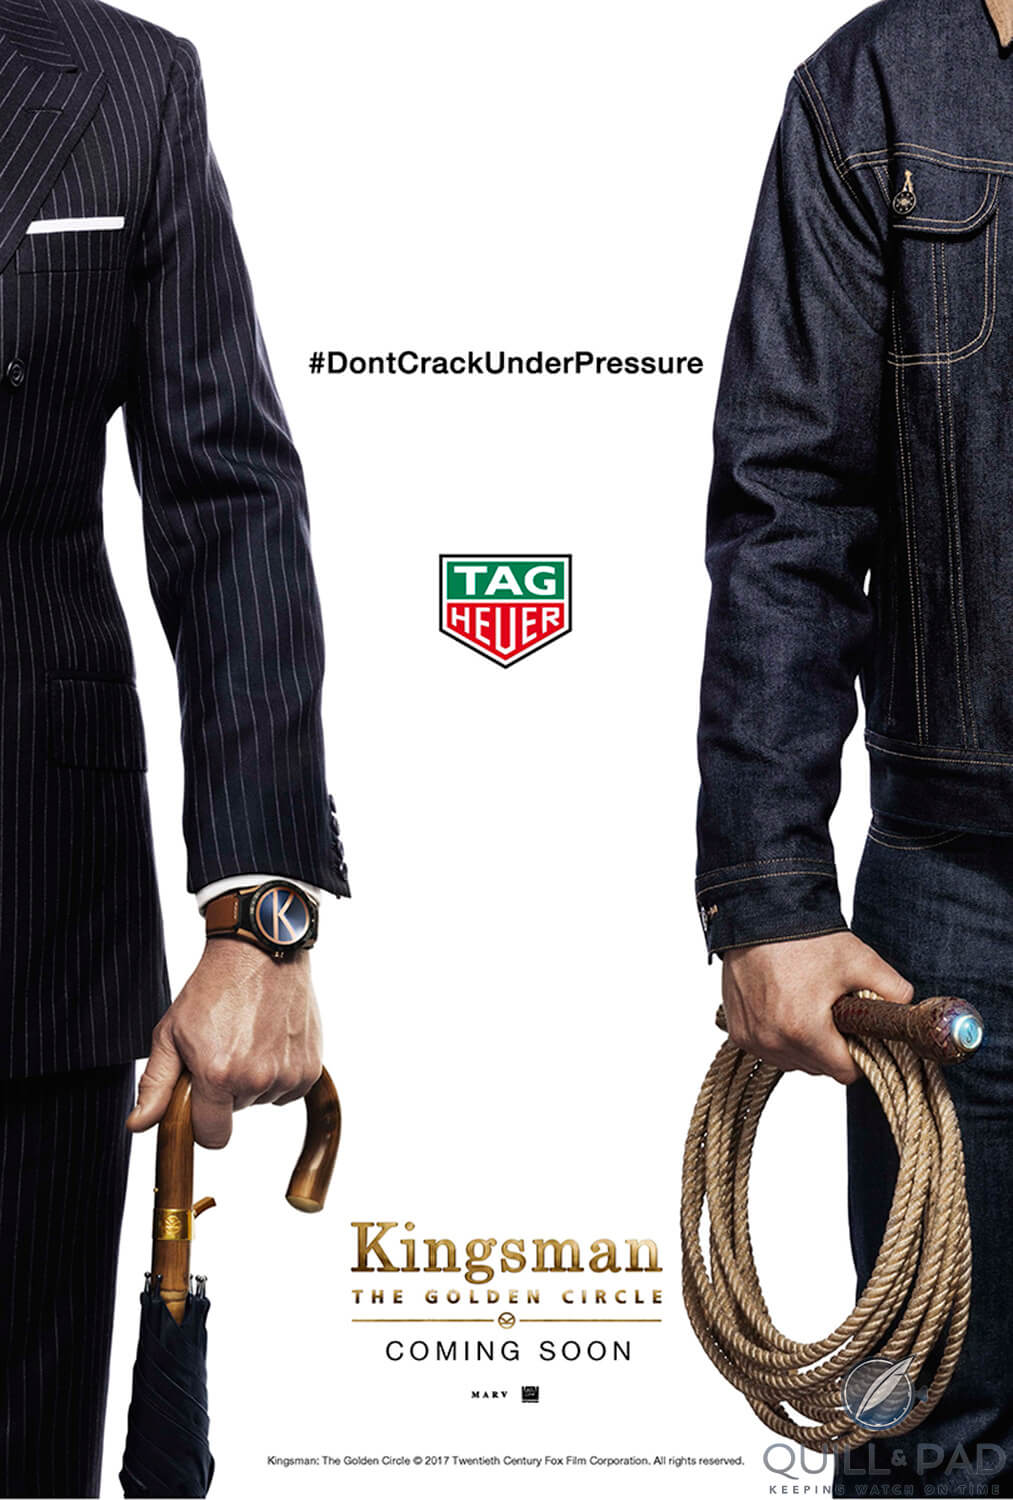 Sequel 'Kingsman: The Golden Circle' features the TAG Heuer Connected Modular 45